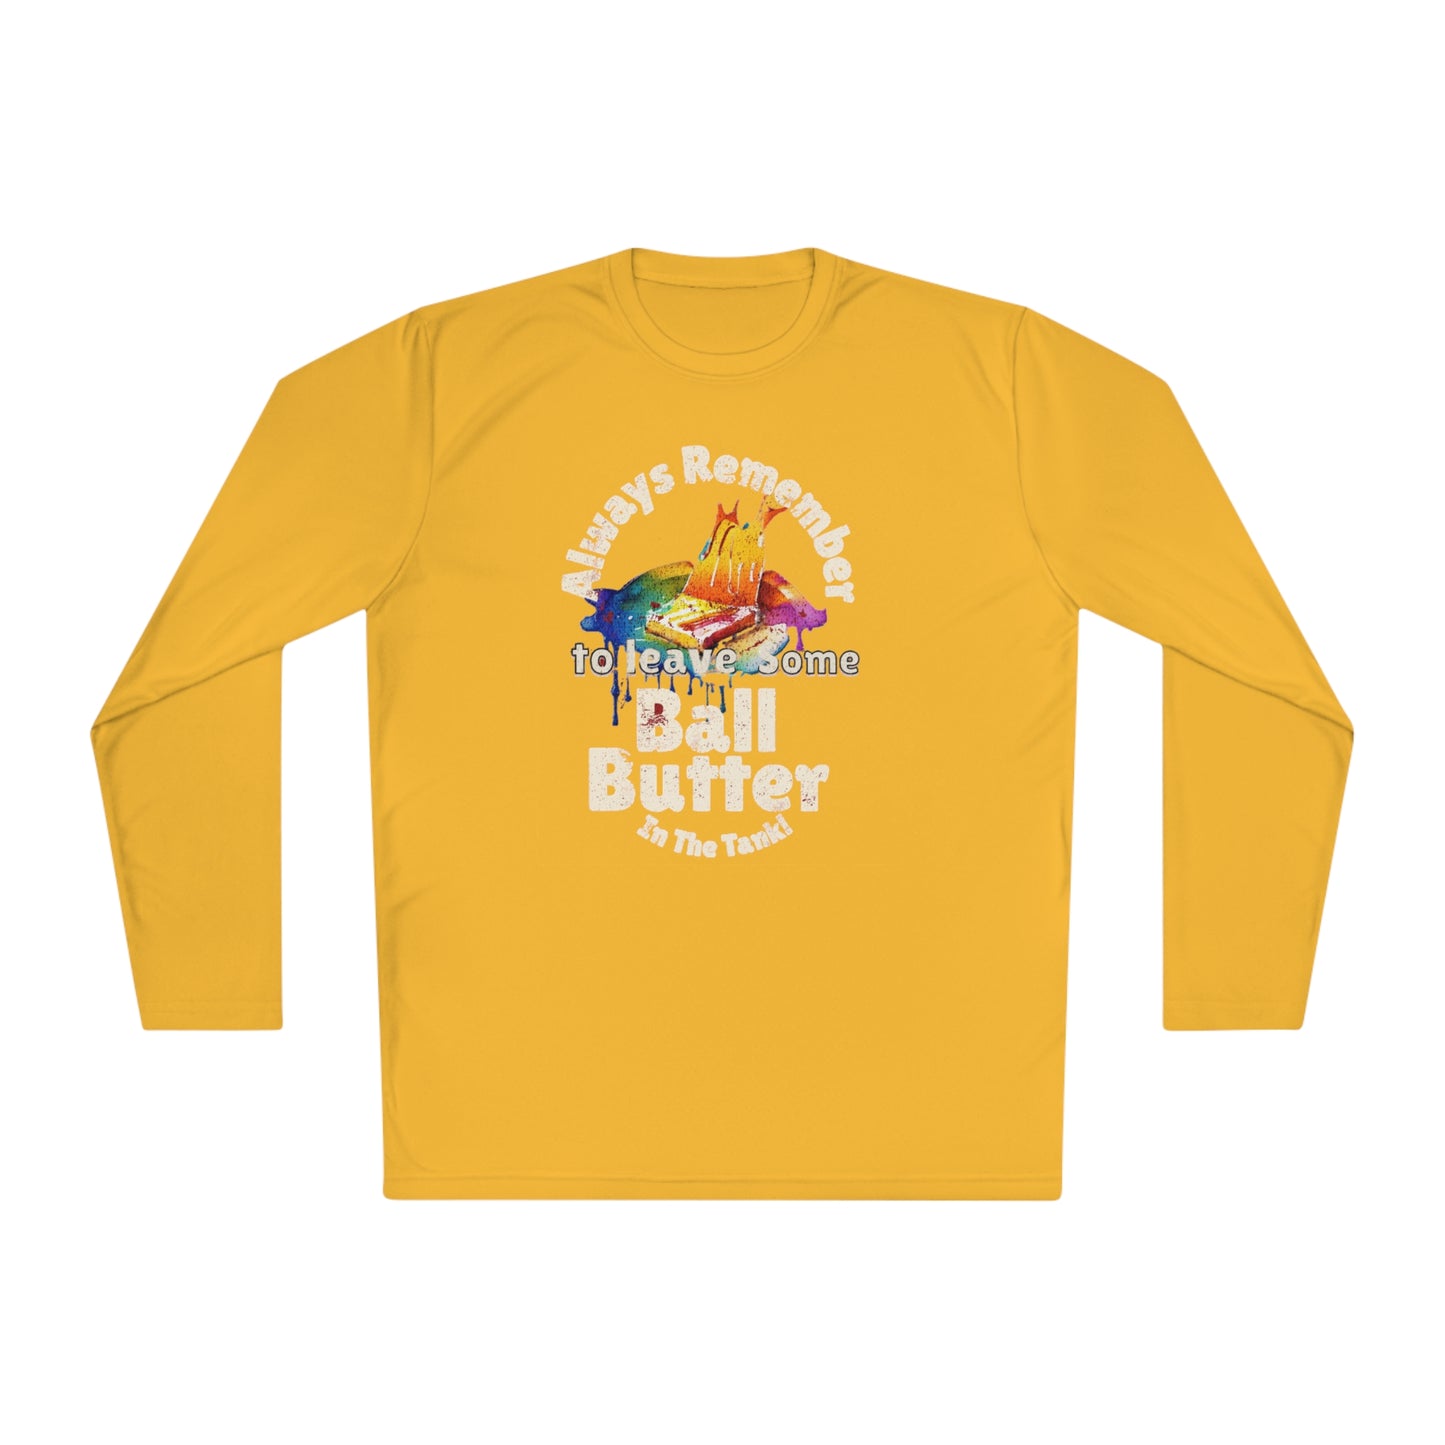 Always remember to leave some Ball Butter in the tank Lightweight Long Sleeve Tee